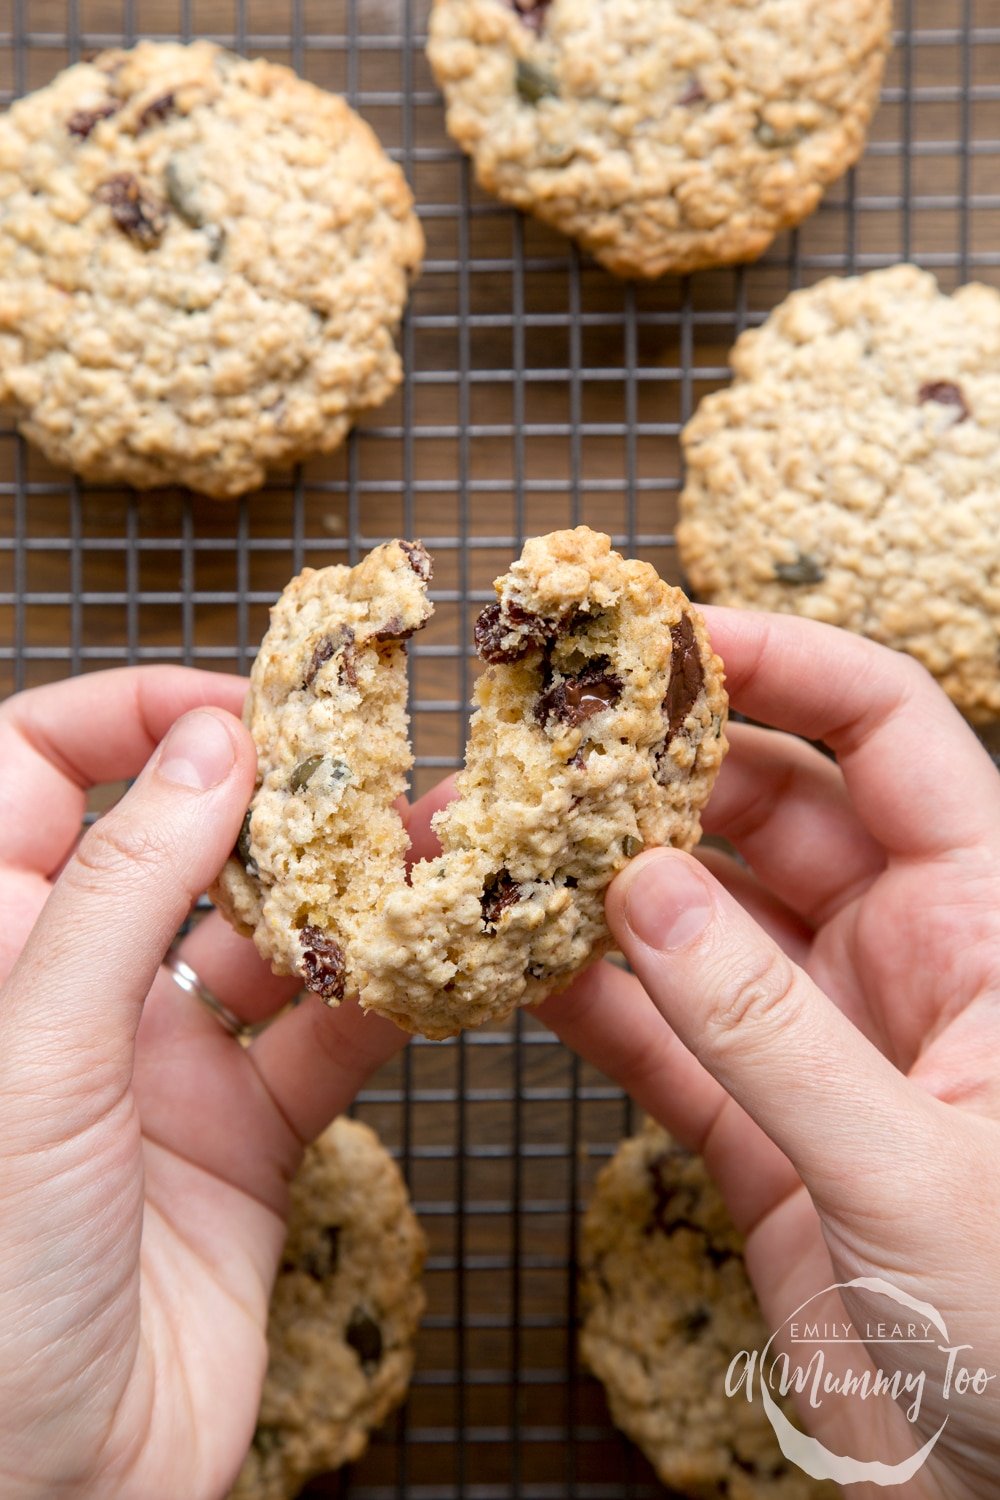 A hand holds a vegan oat cookie and is breaking it open. More vegan oat cookies are shown in the background, cooling on a wire rack.